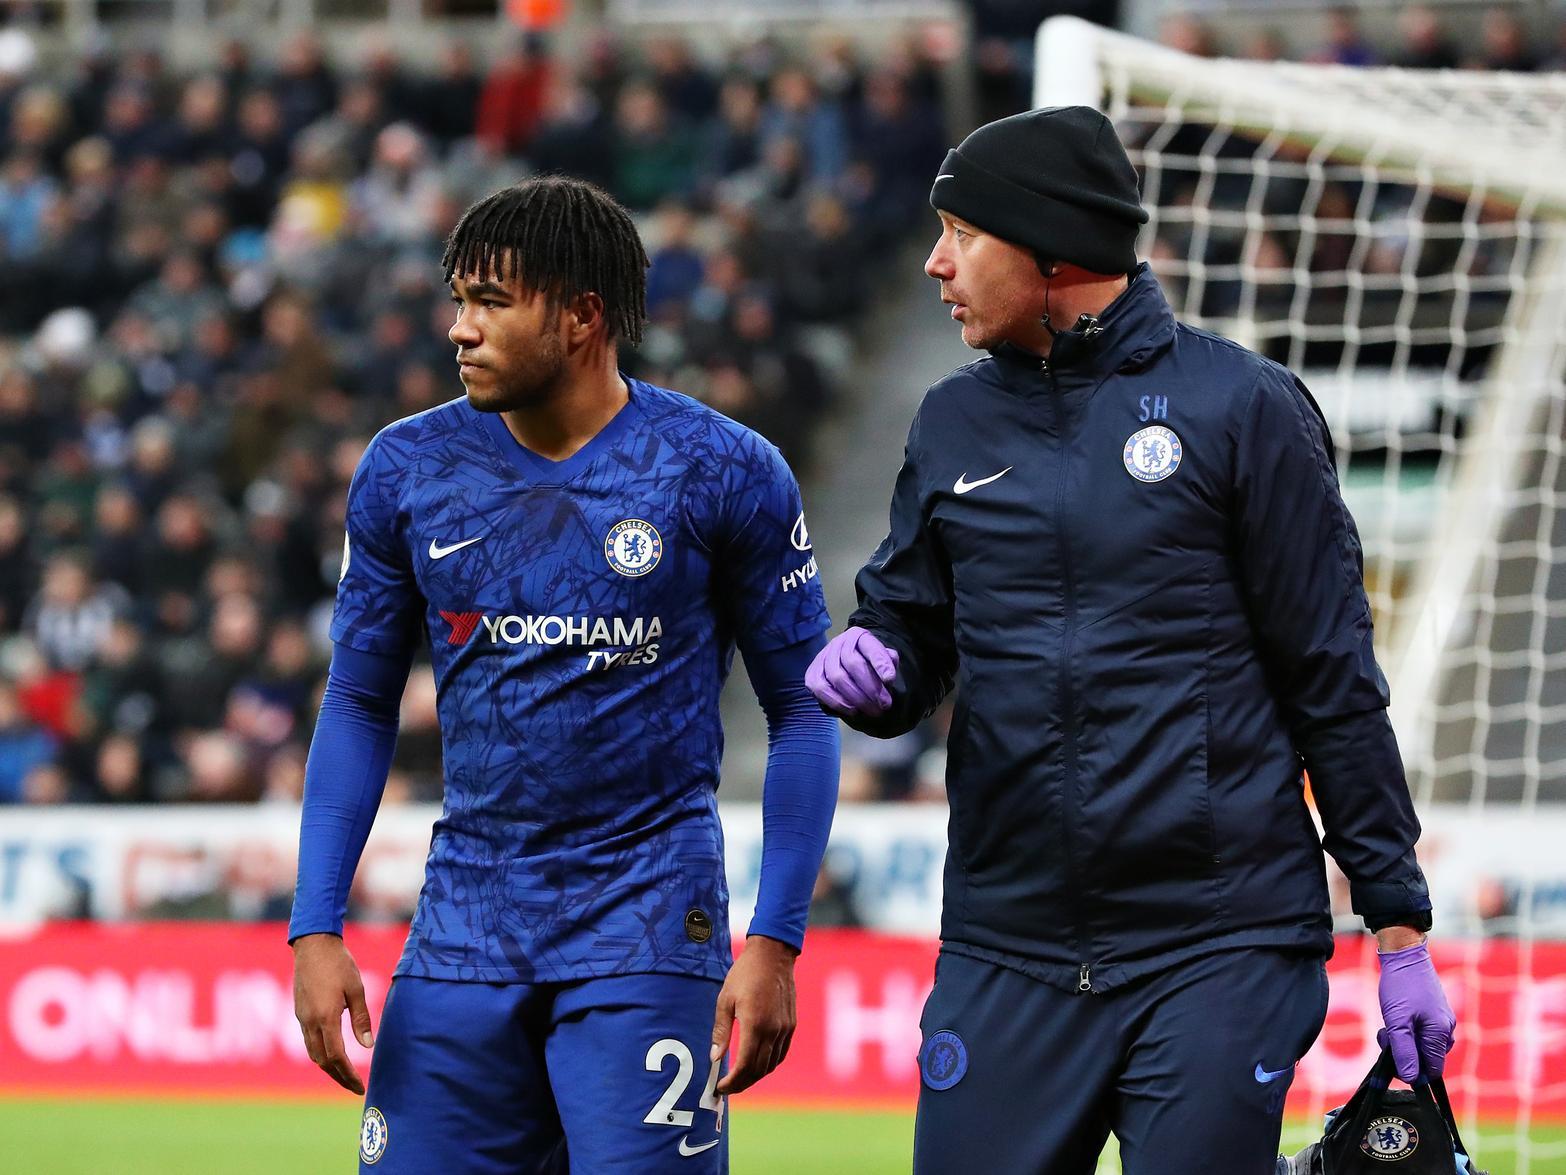 Chelsea manager Frank Lampard says he tried to sign reported Crystal Palace target Reece James while in charge of Derby County. (Daily Mail)